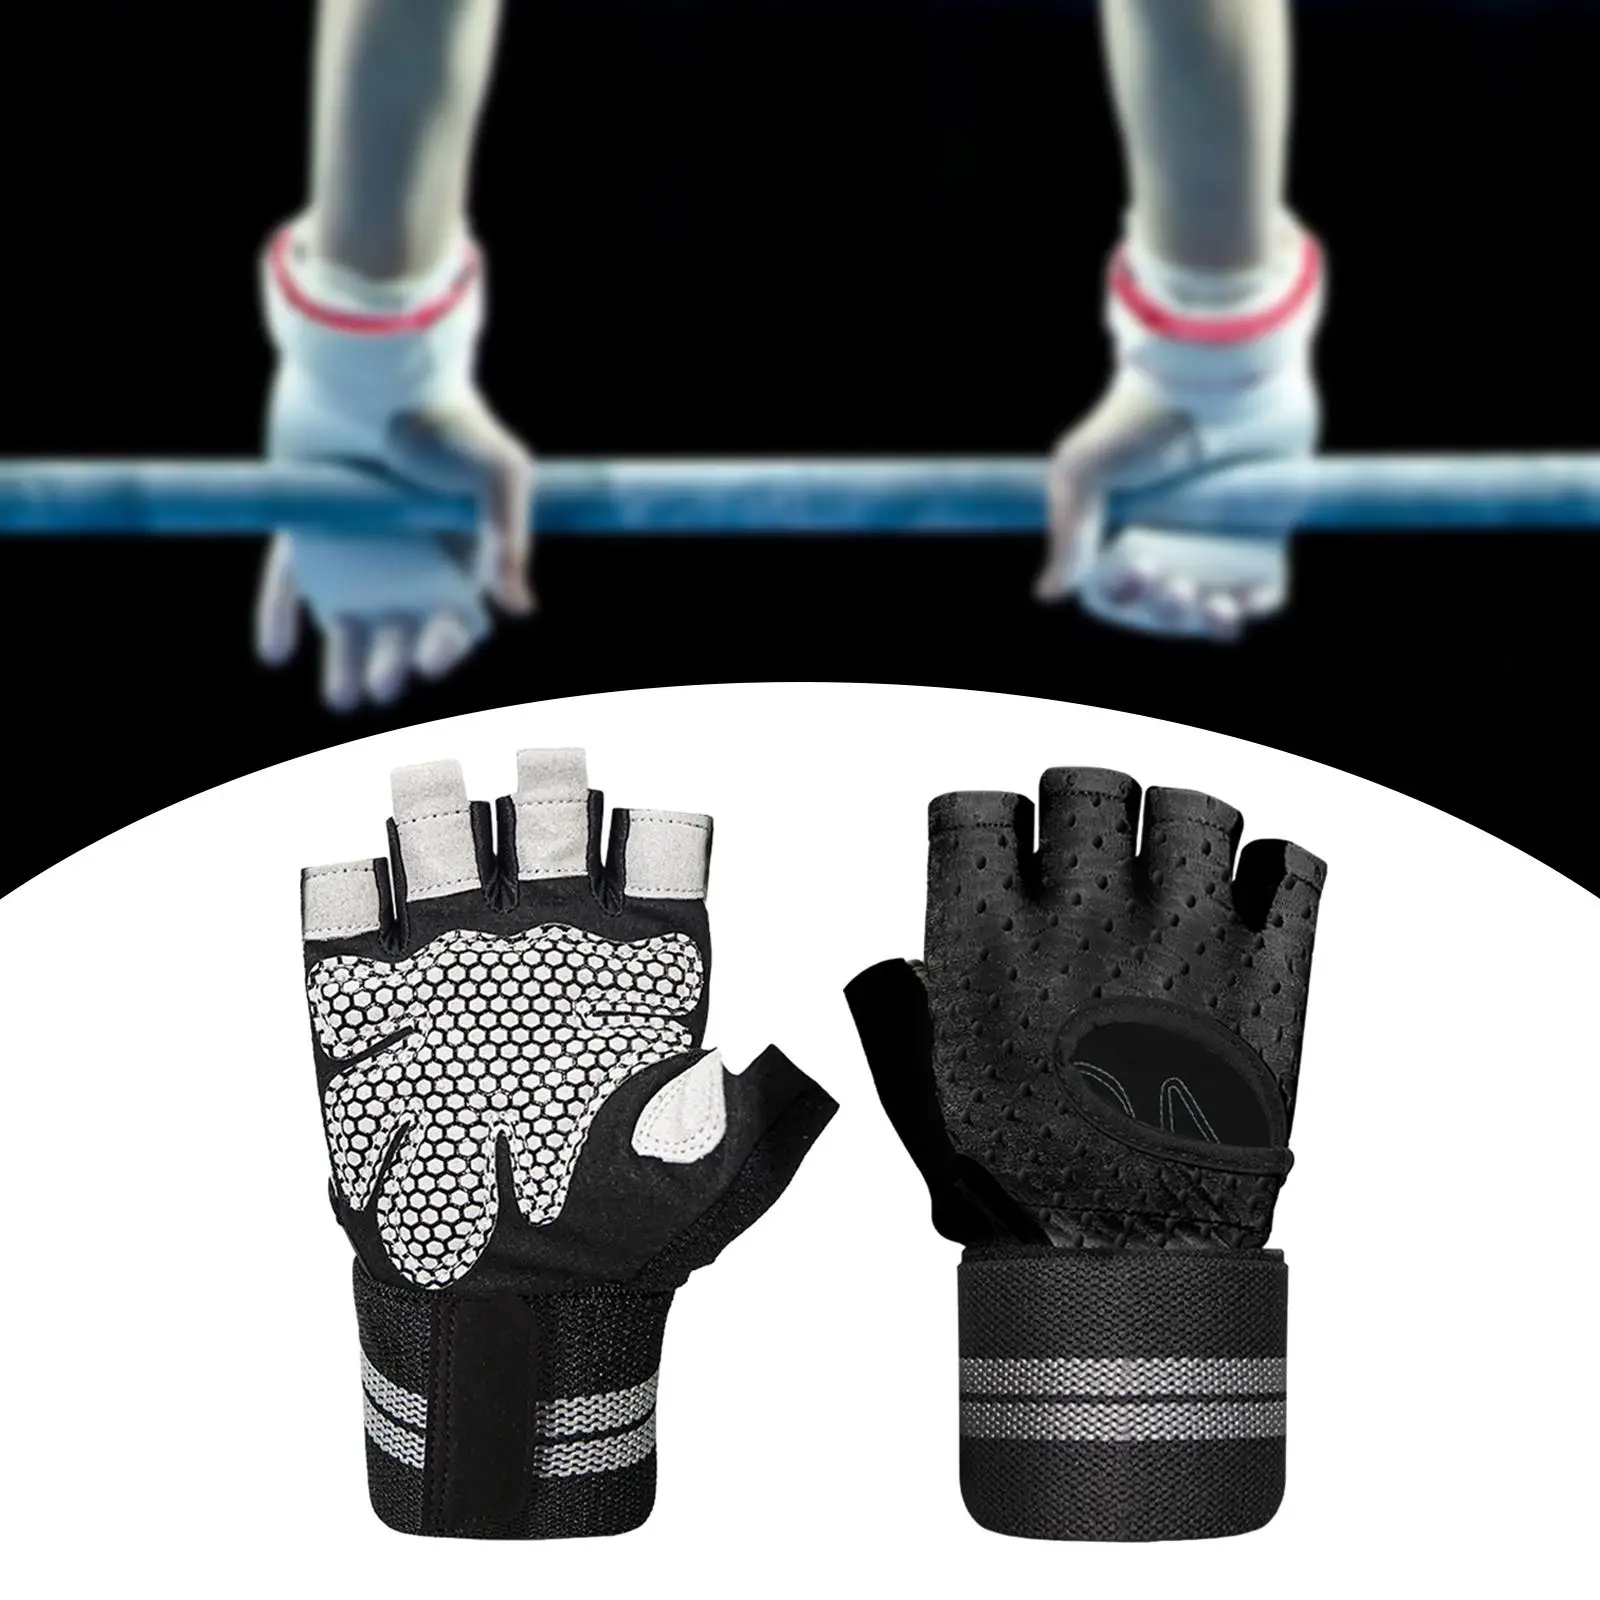 Half Finger Gloves Fitness Gloves Biking Gloves, Cycling Gloves, Weight Lifting Workout Gloves for Workout, Gym Camping